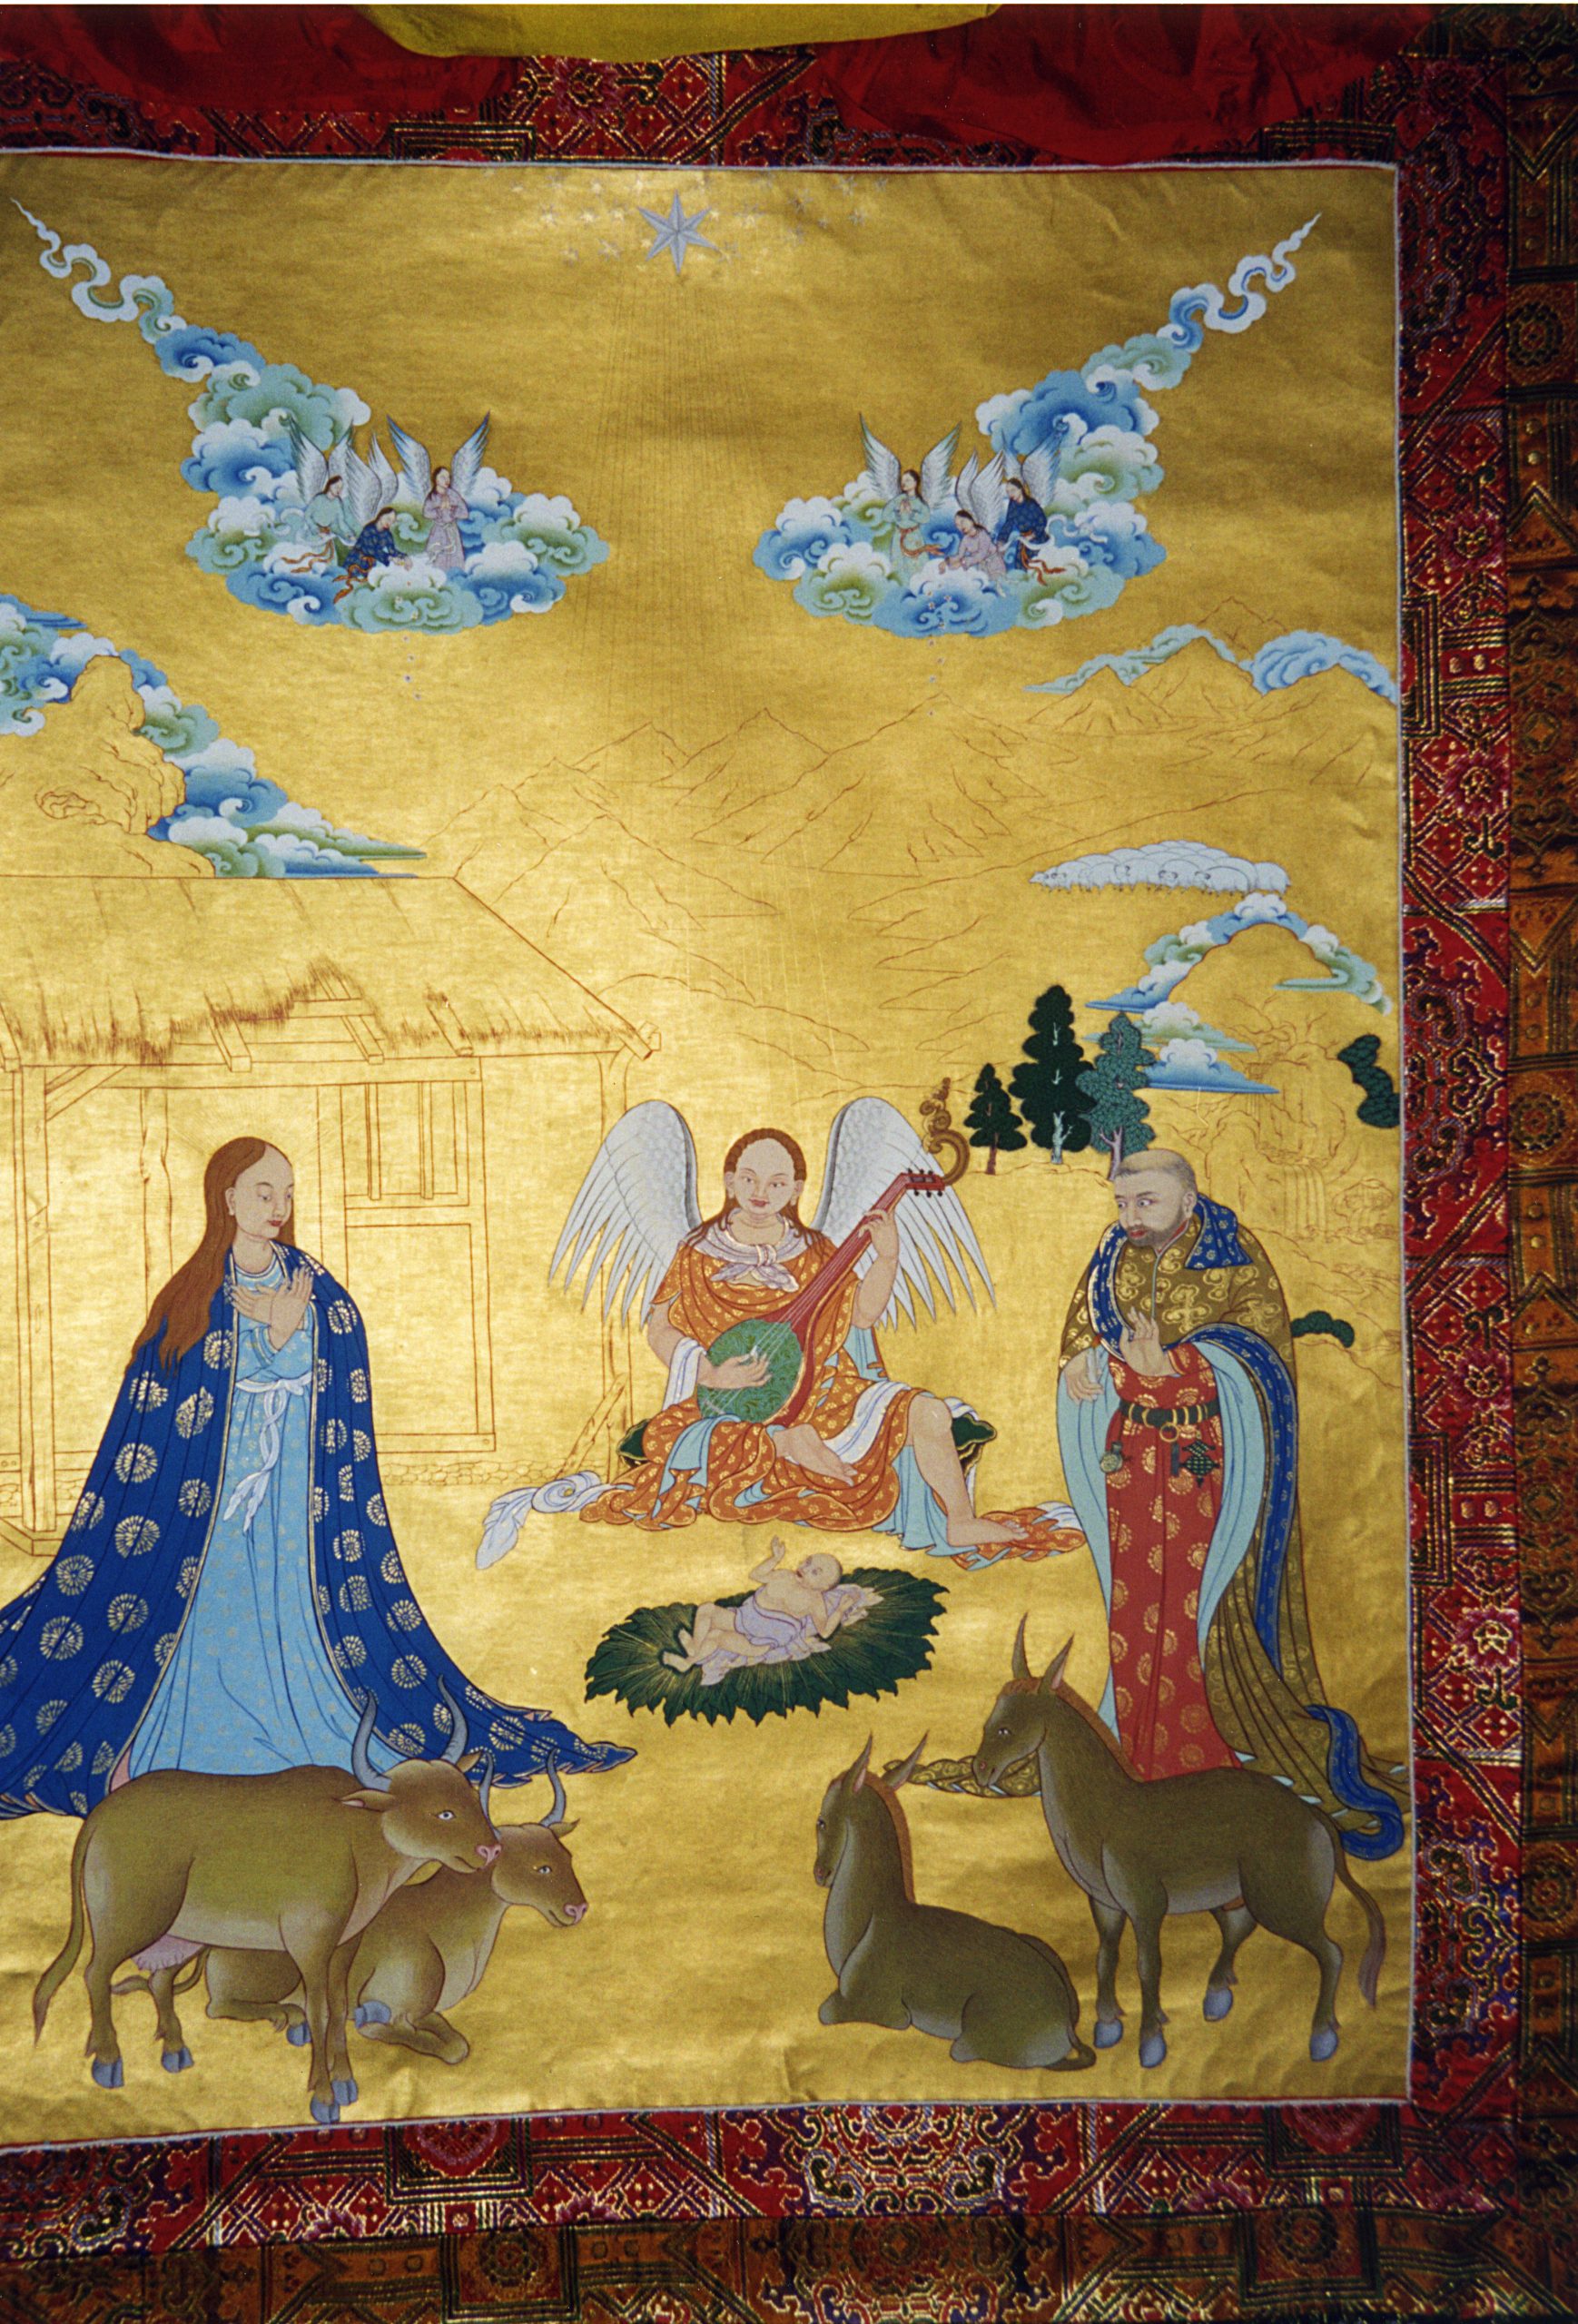 Tibetan Nativity Scene - Thank You Gift from Dalai Lama for the Way of Peace, India